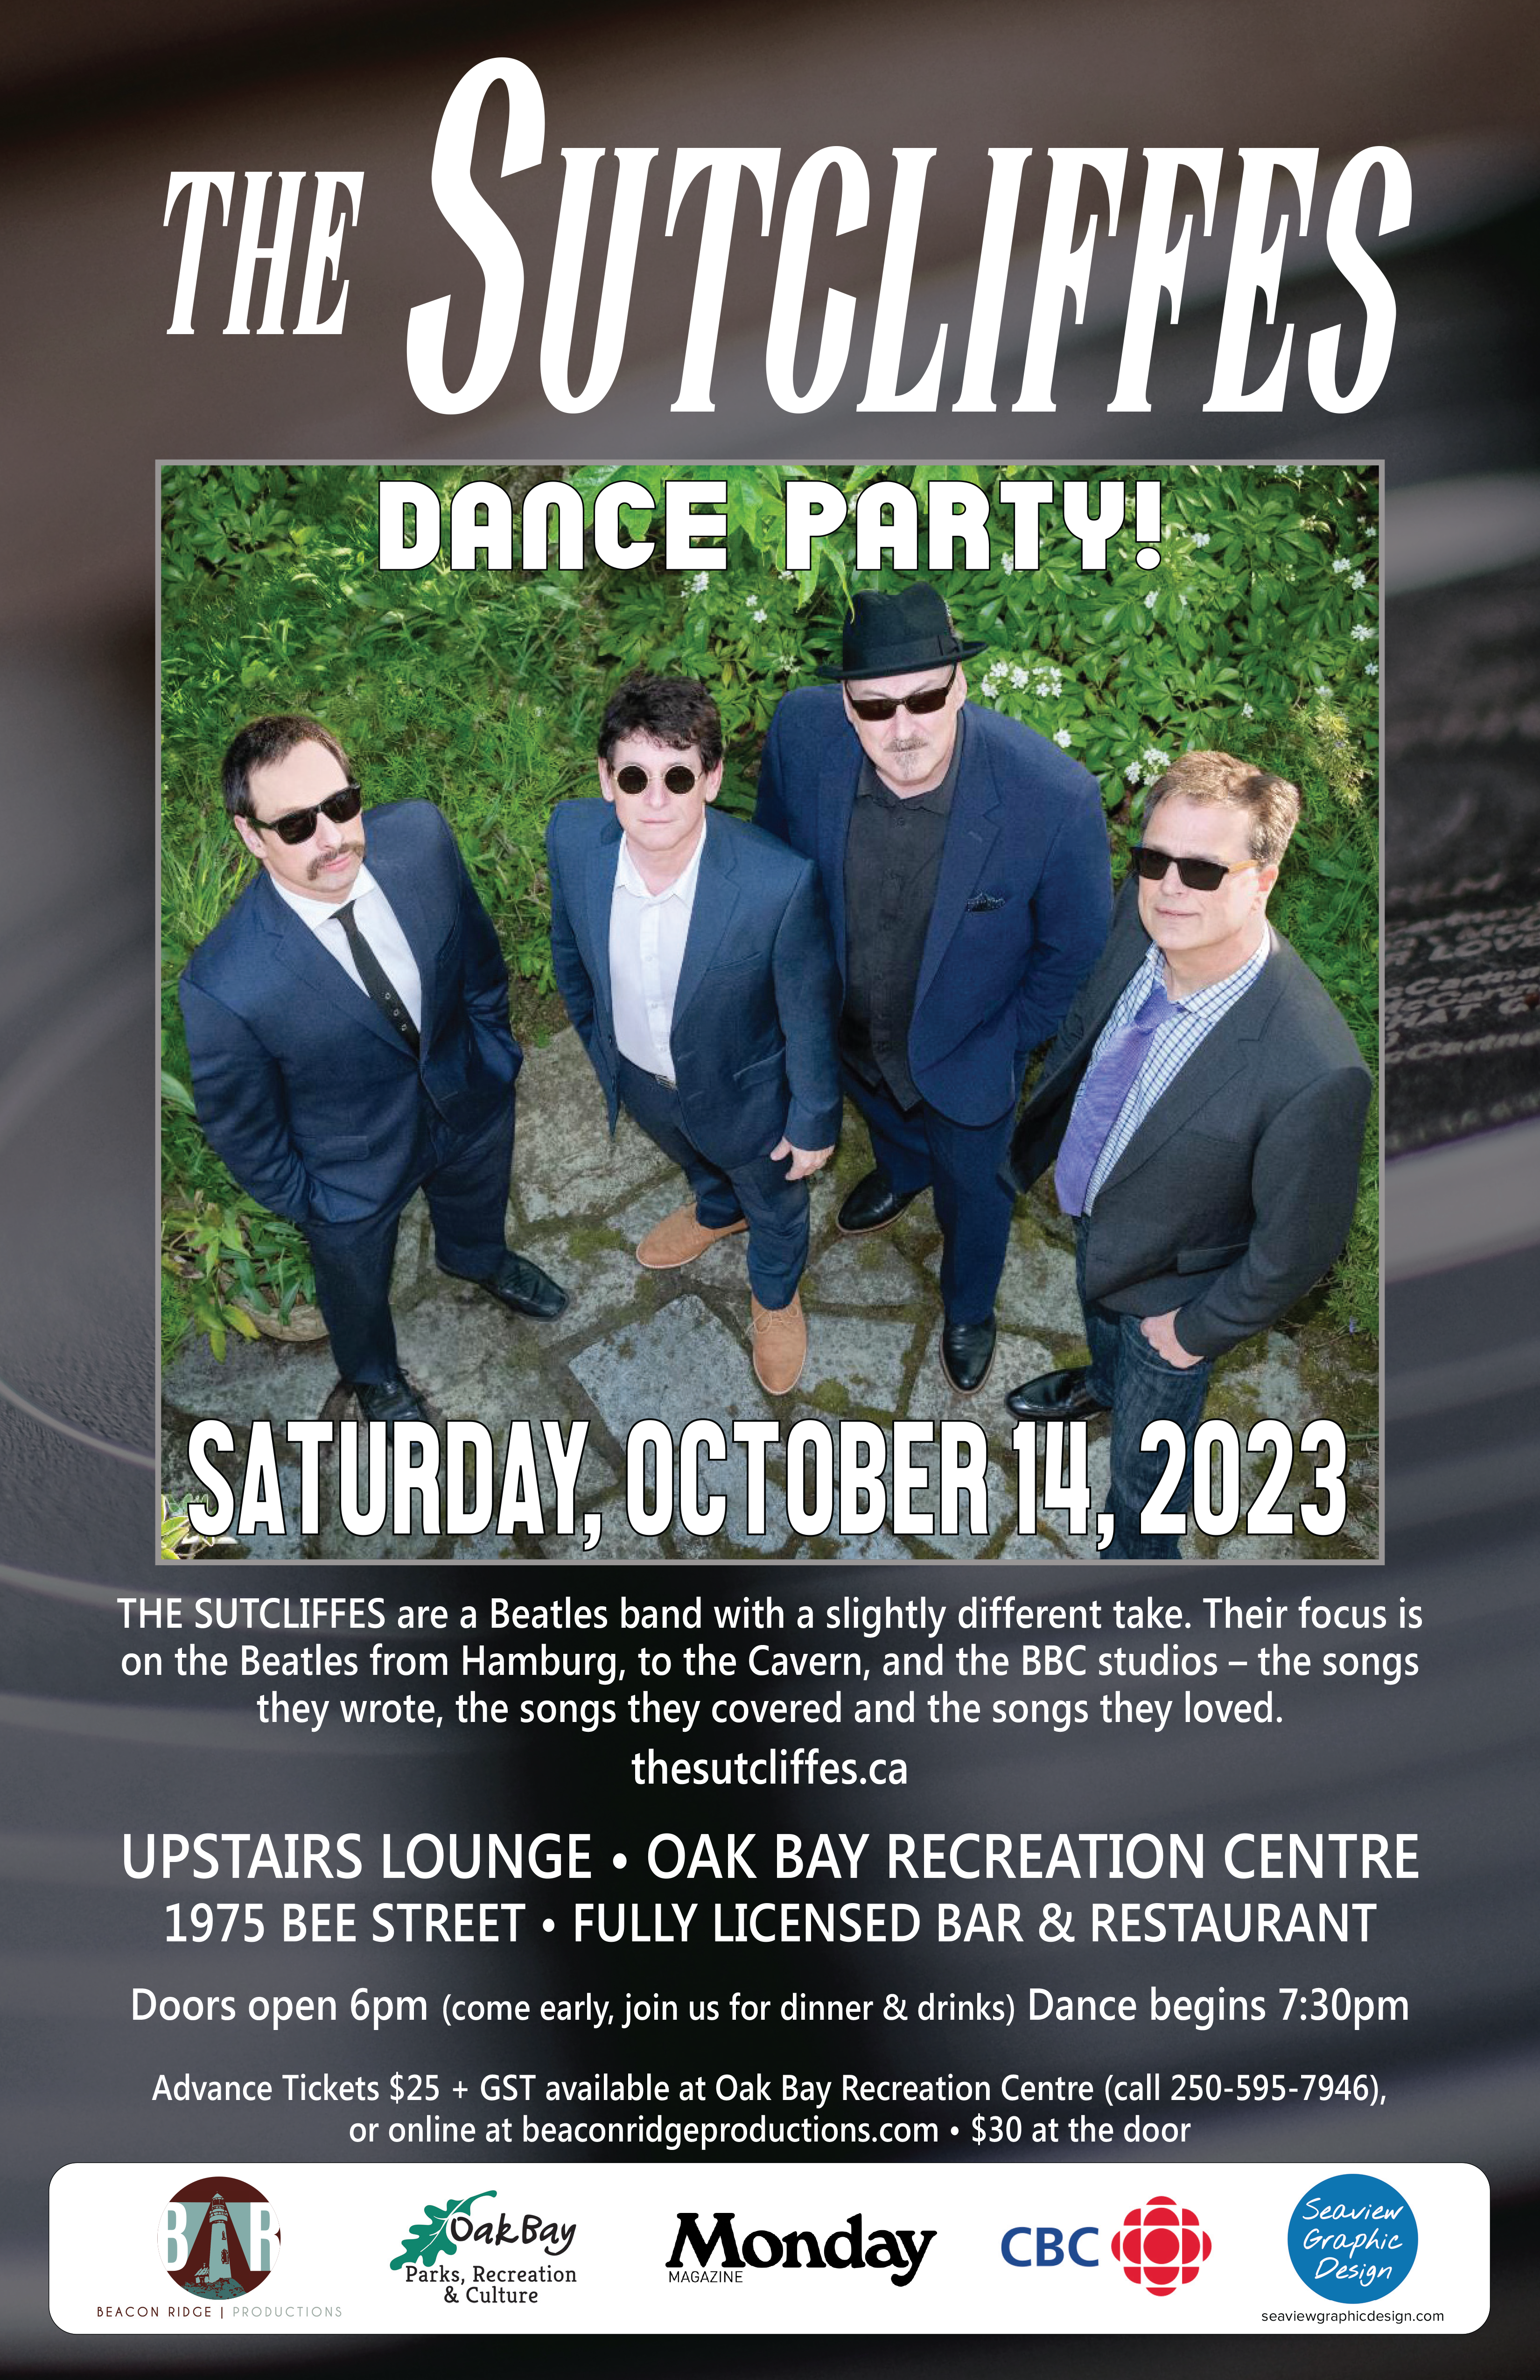 1694193115_Poster_11x17_The_Sutcliffes_Dance_Party_Oct14_2023_bleed_poster.png